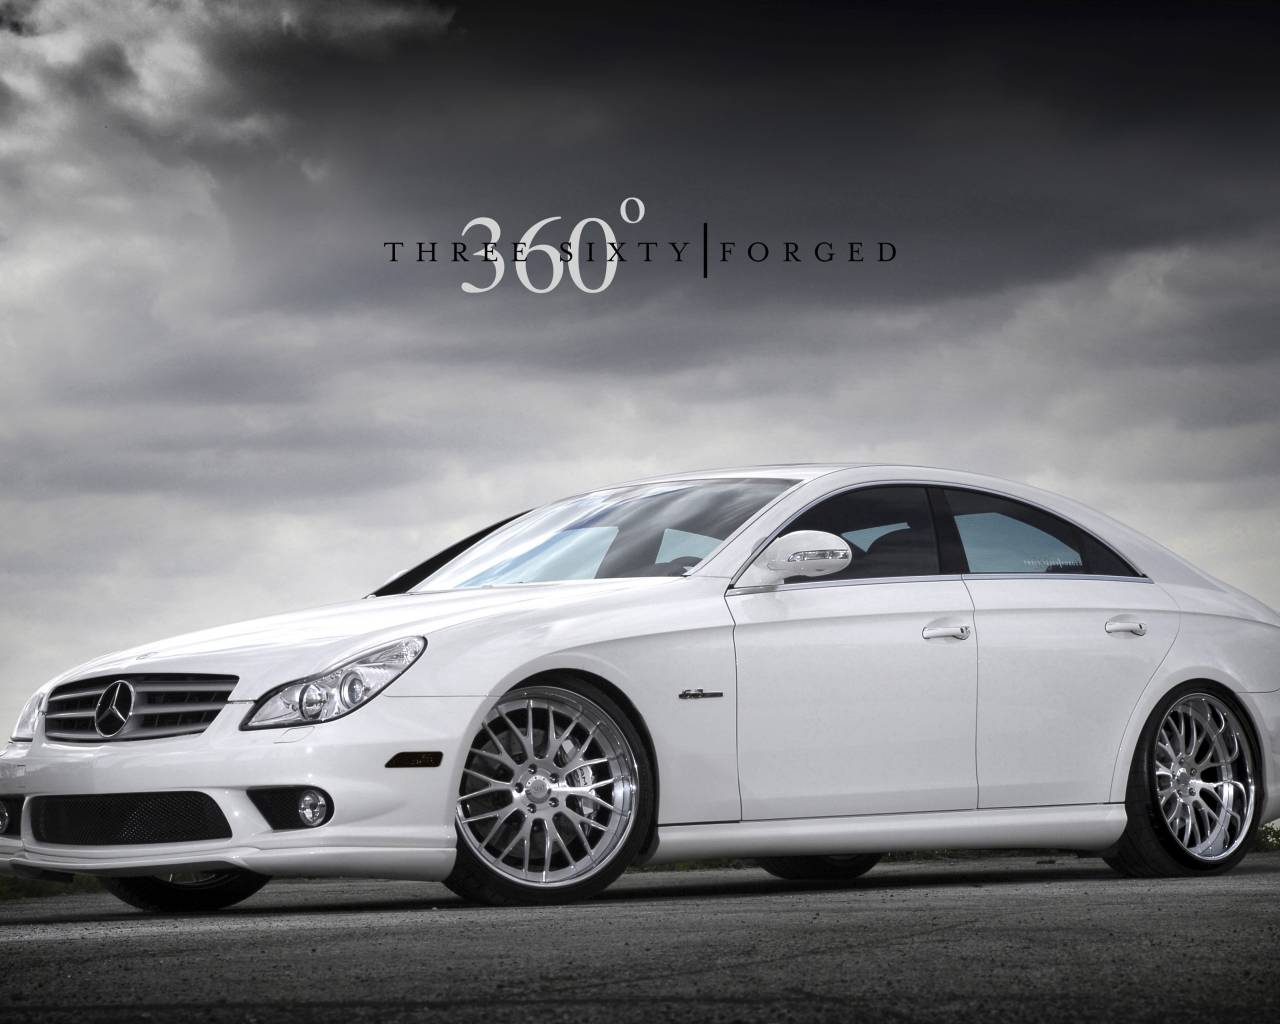 mercedes cls, hd wallpapers, 360 forged, белый мерс на рабочий стол